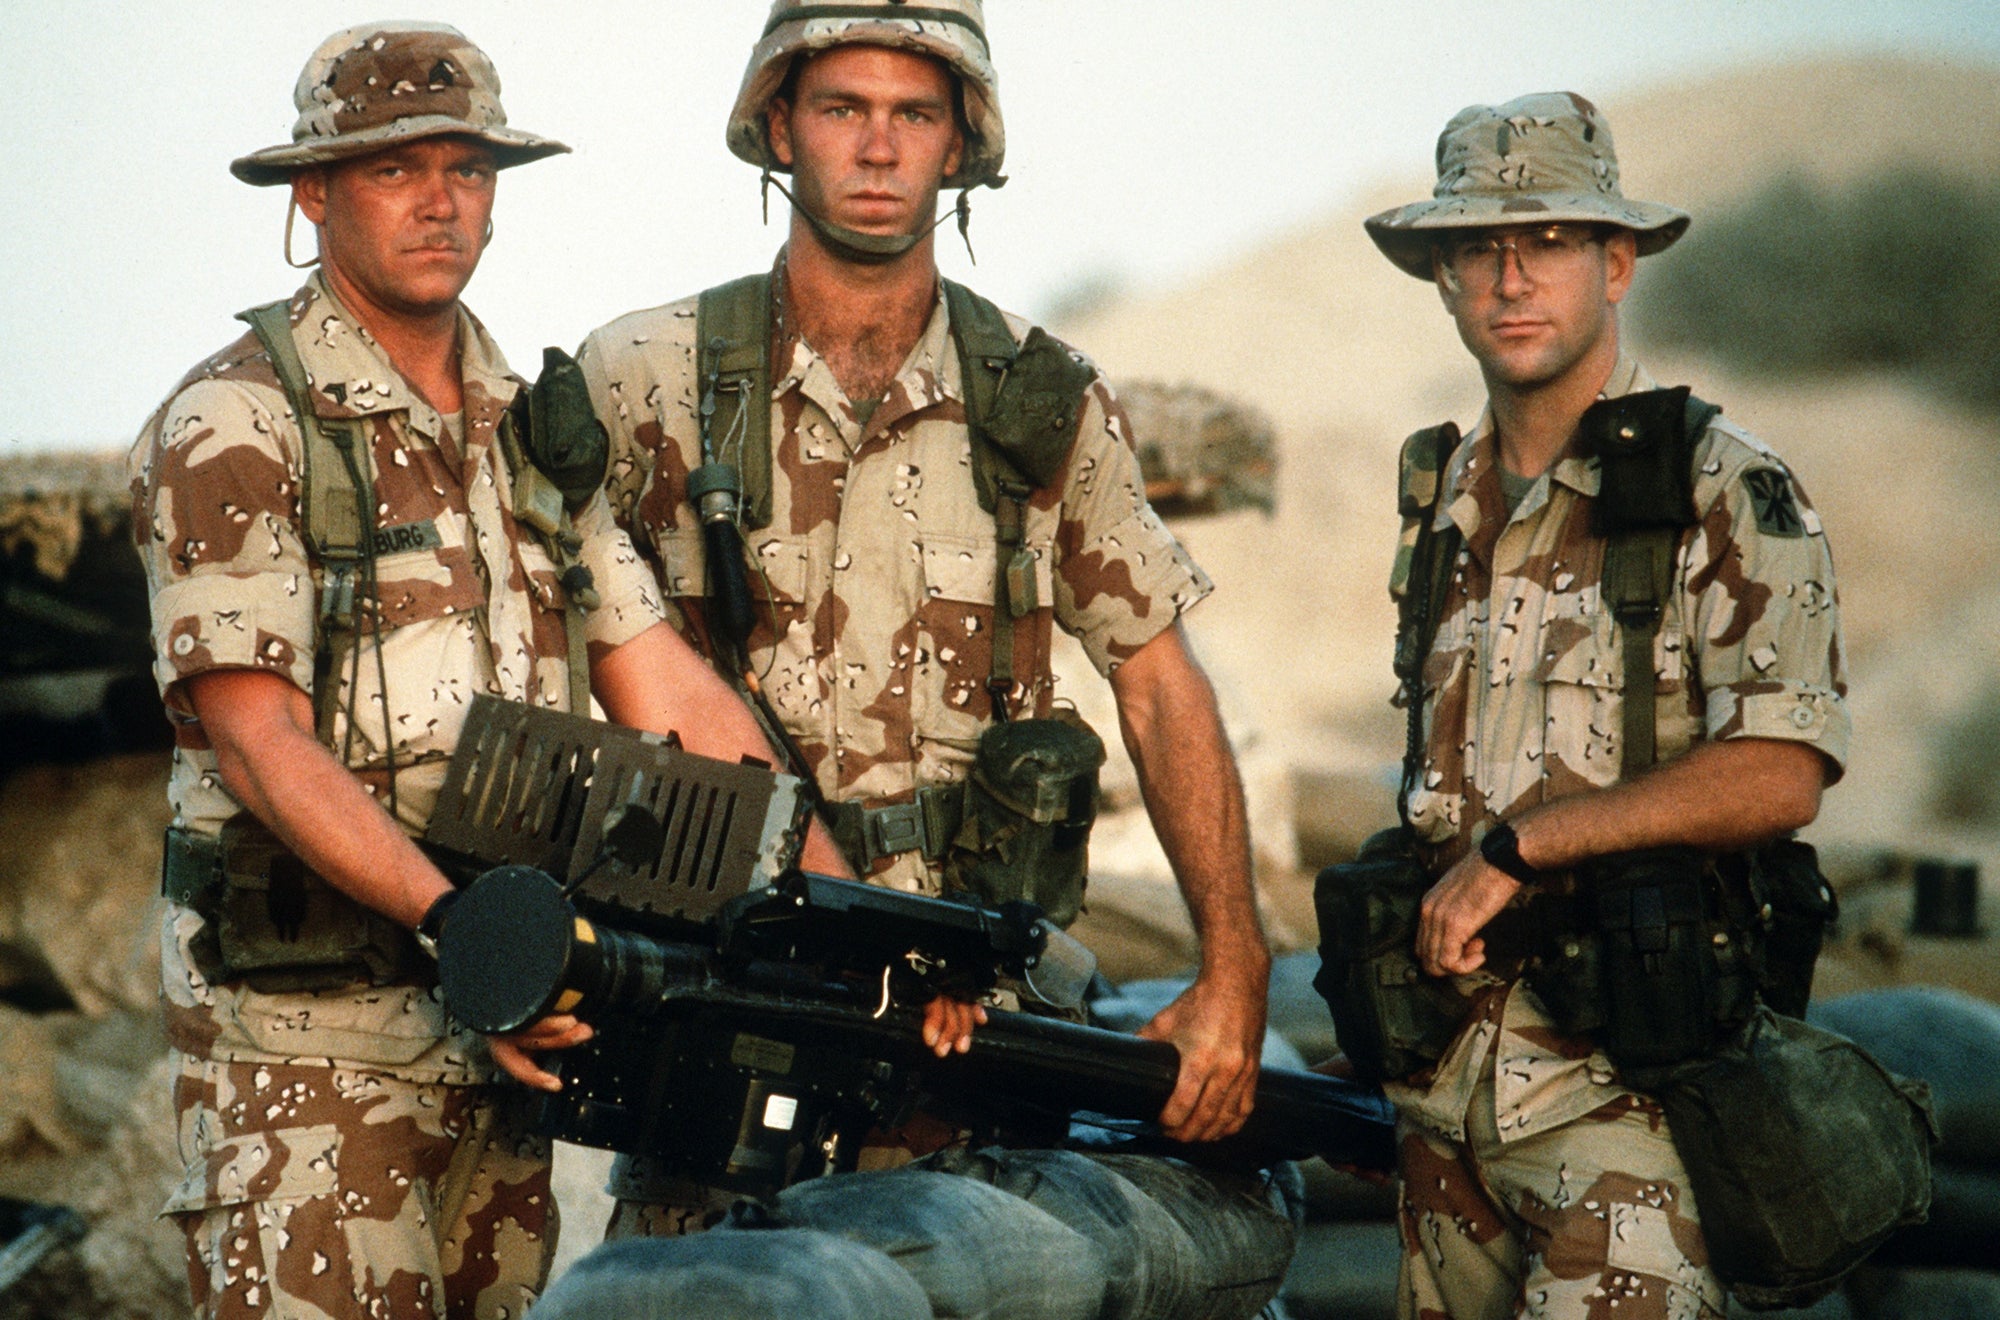 US Army soldiers posing for a photo during Operation Desert Storm, representing Tactically Acquired Gulf War merchandise collection.